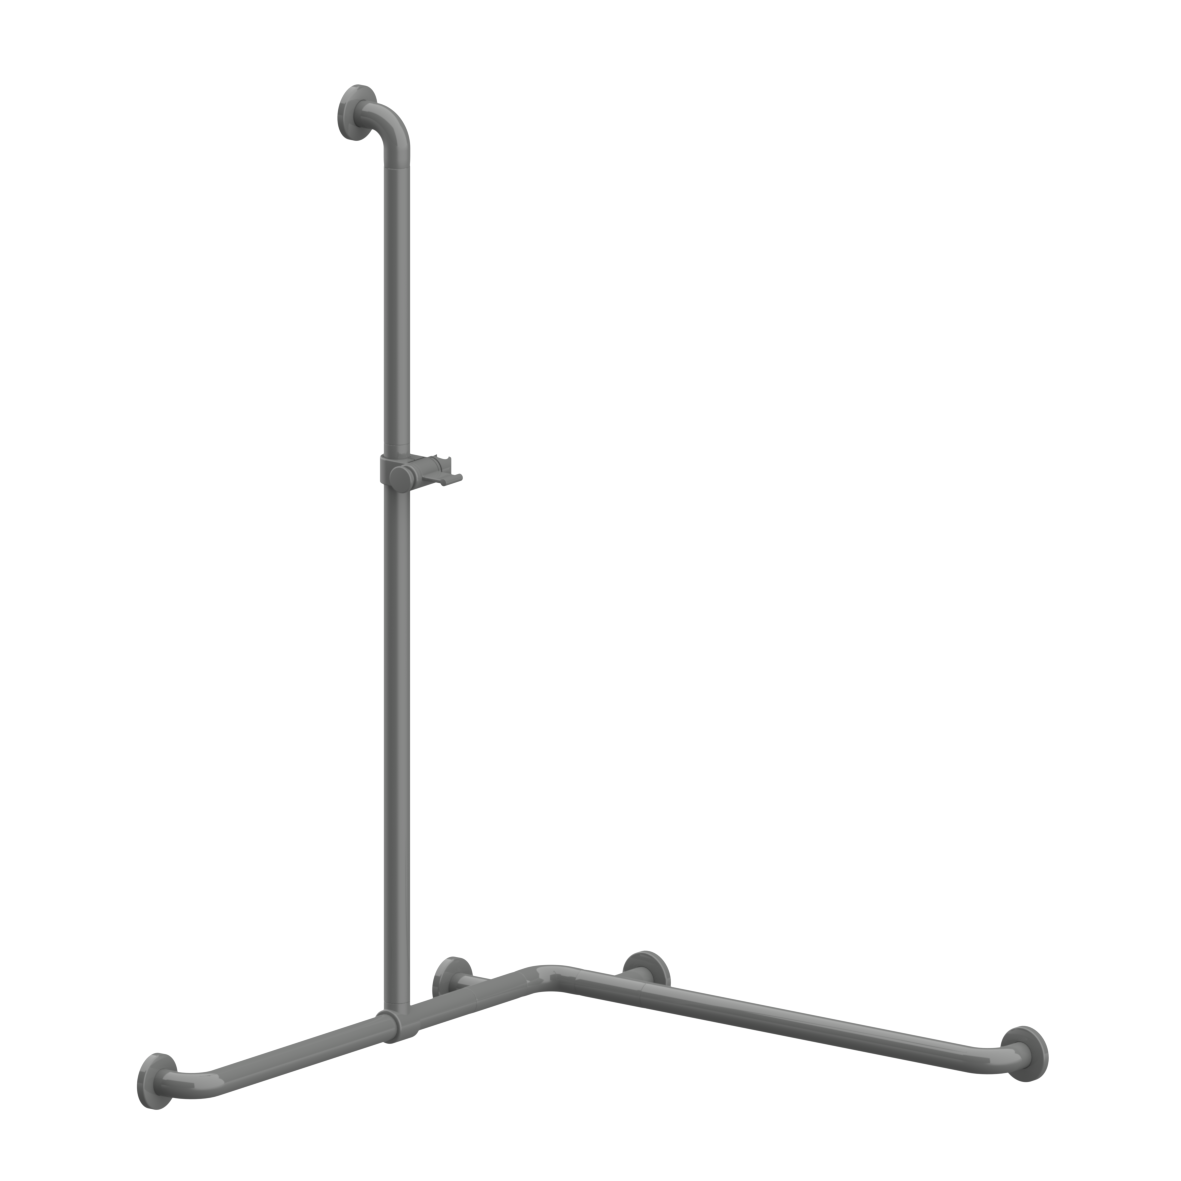 Nylon Care 300 Shower handrail, with movable shower handrail, left and right, 767 x 767 x 1158 mm, Dark grey